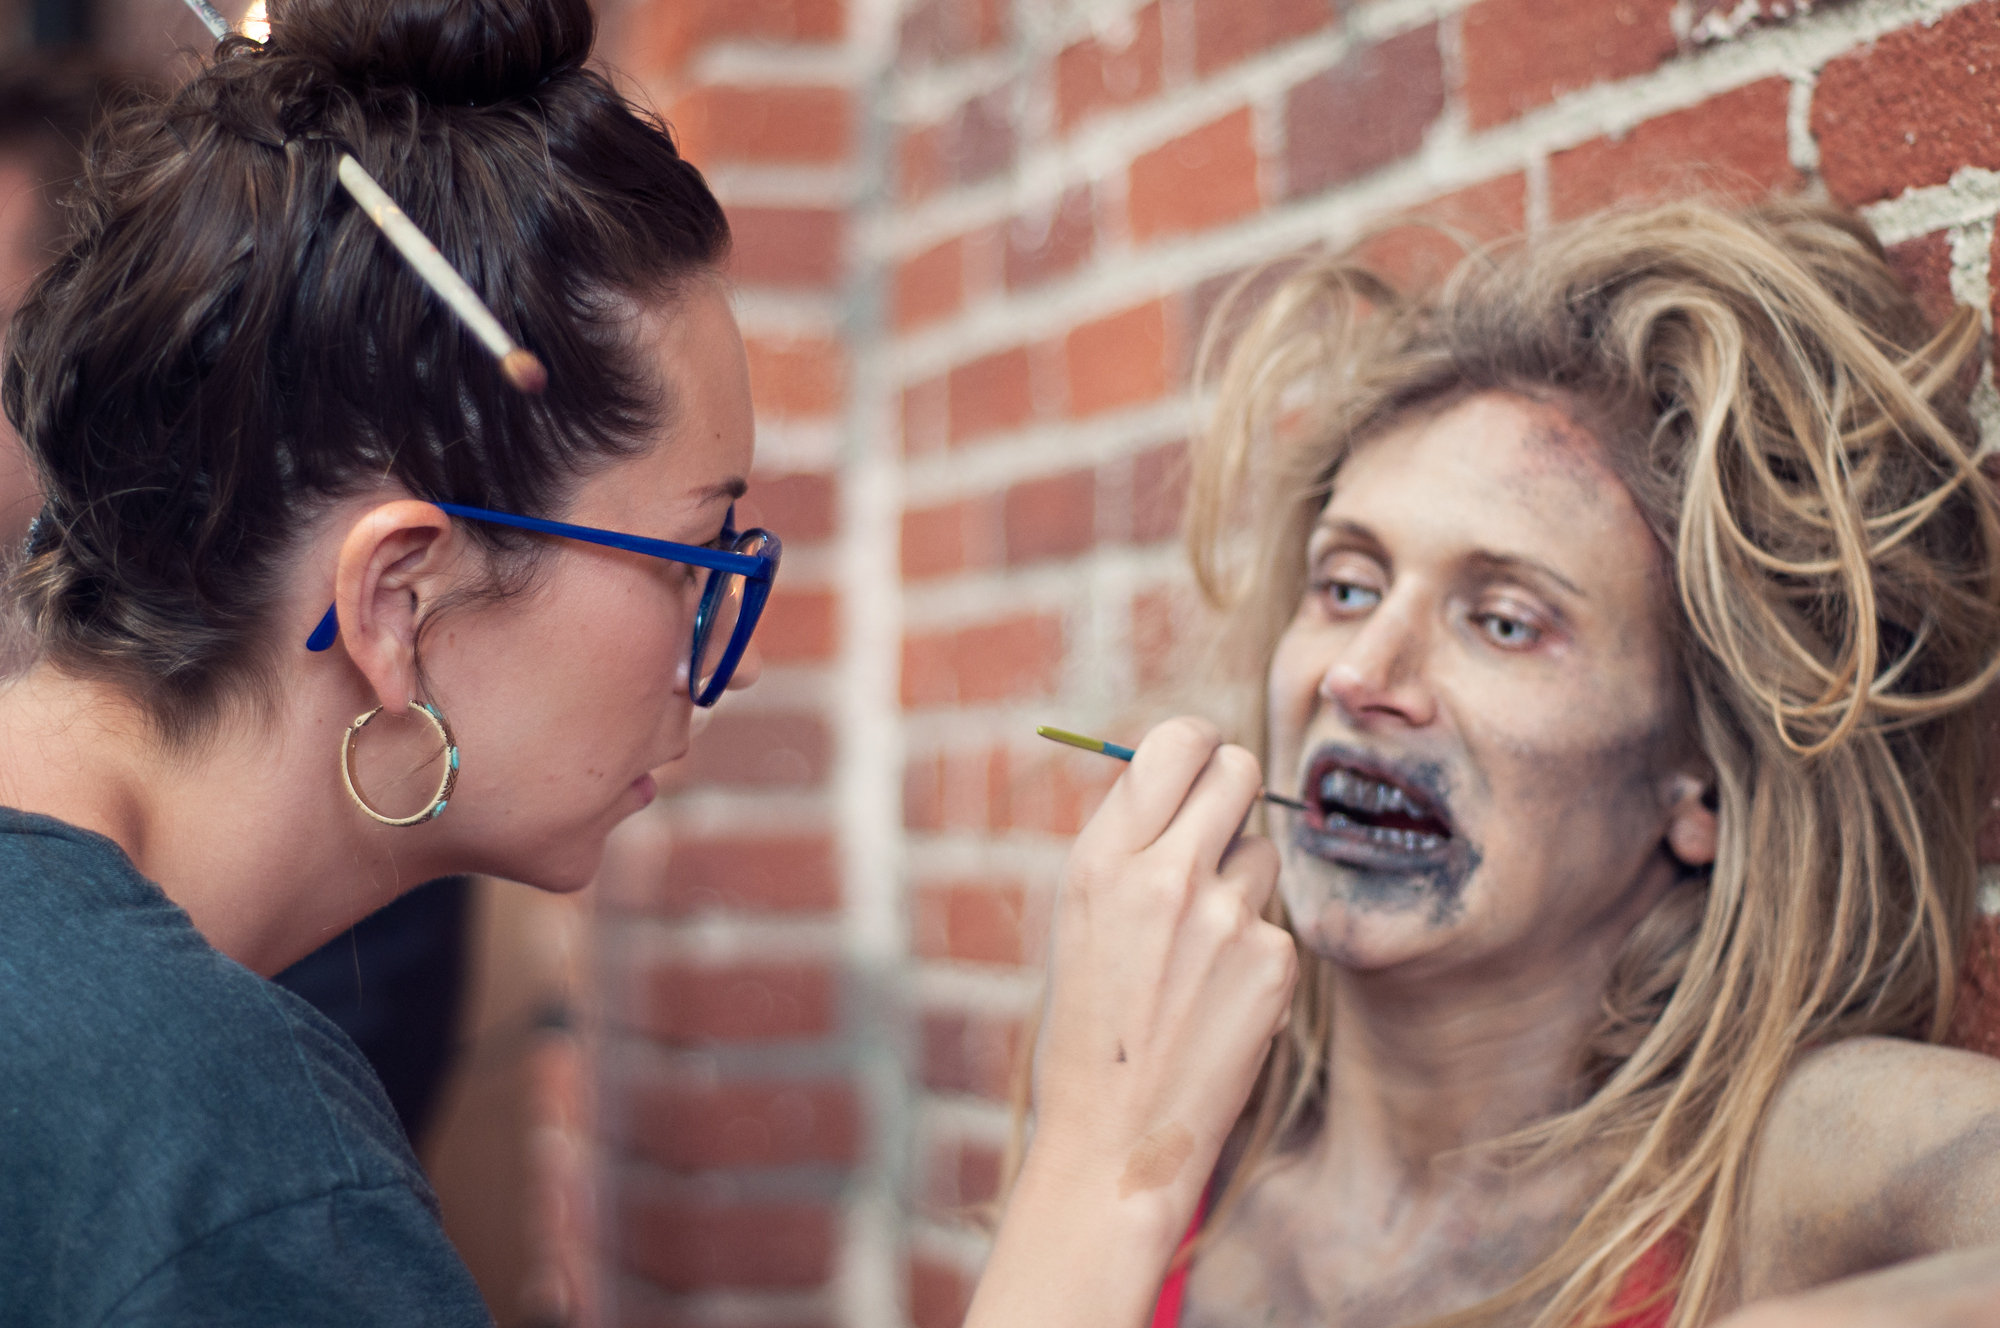 Makeup artist Annie Cardea and Jennifer Landon on the set of Rabid Weight Loss.